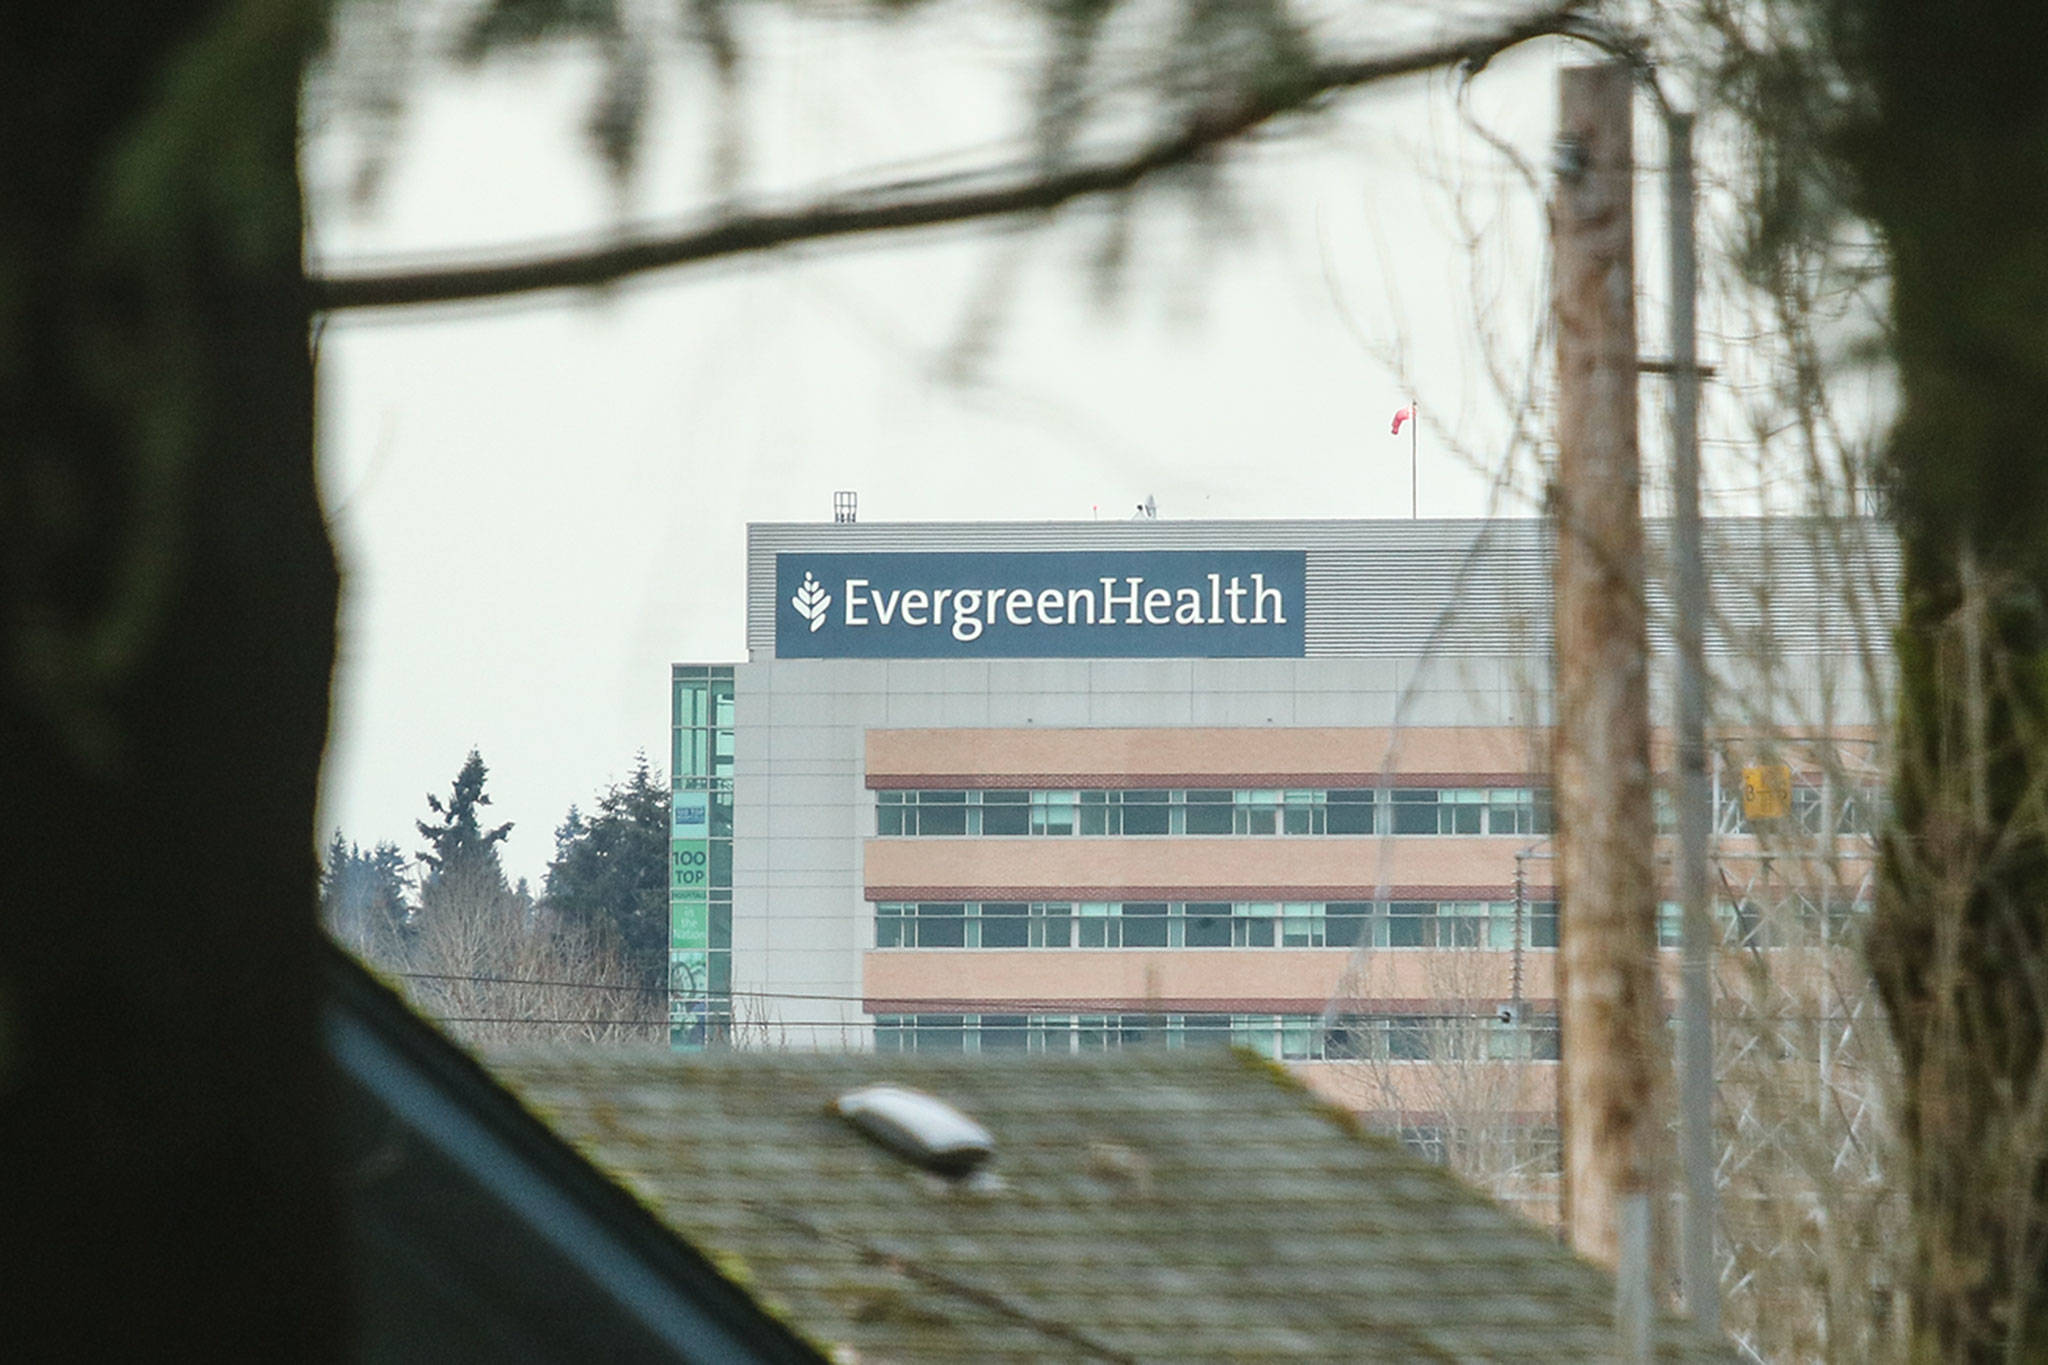 EvergreenHealth named one of America’s 100 Top Hospitals by Truven Health Analytics